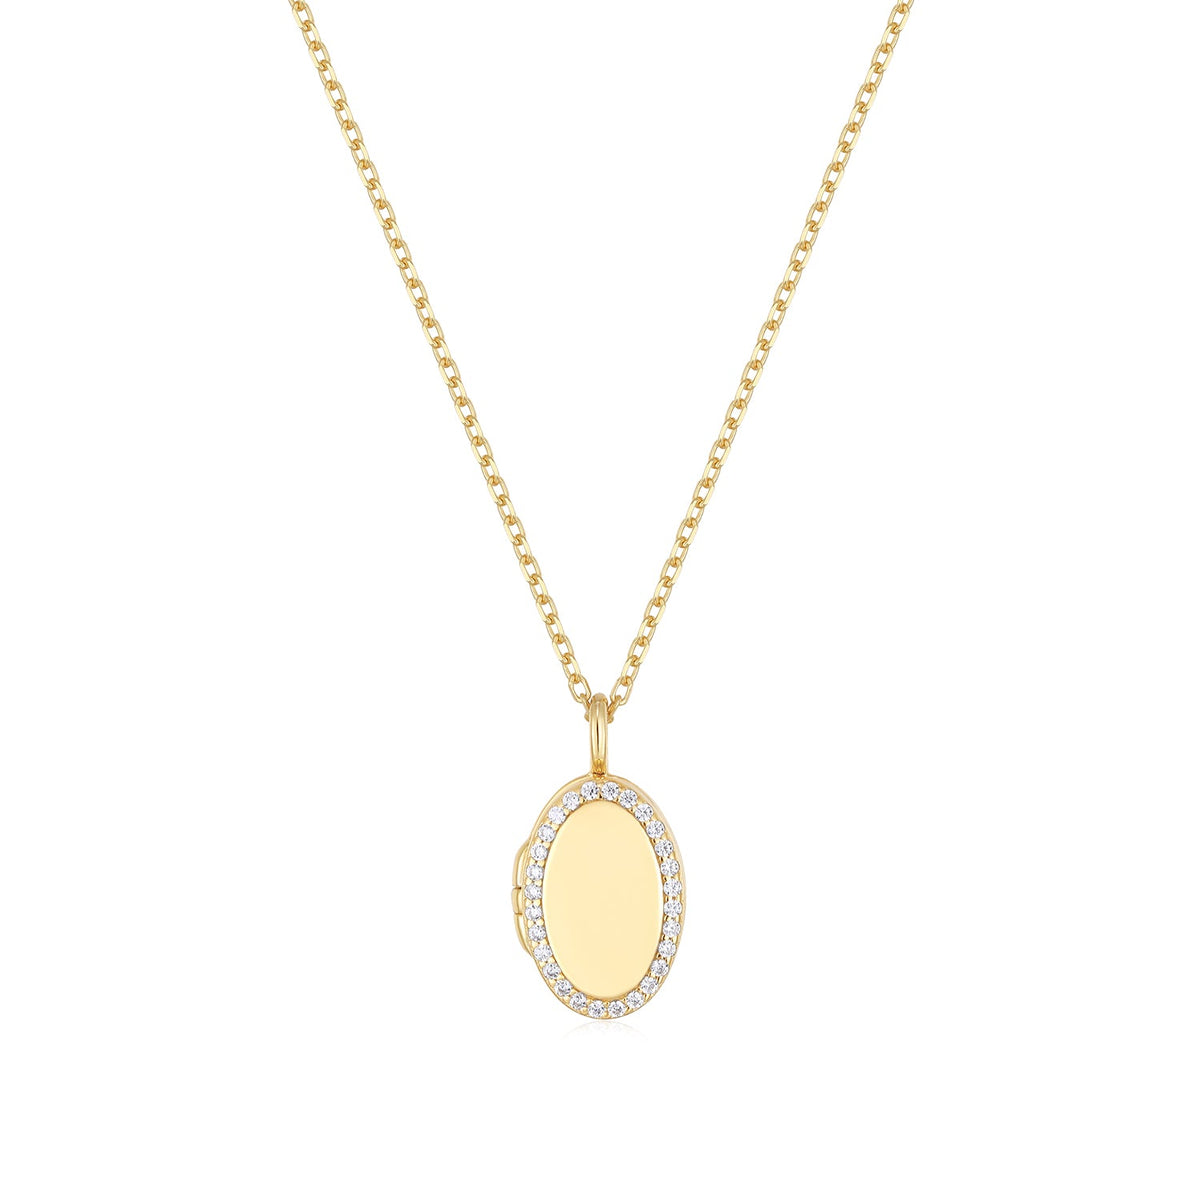 Cybele | Persimmon Necklace | White CZ | 14K Gold Plated 925 Silver